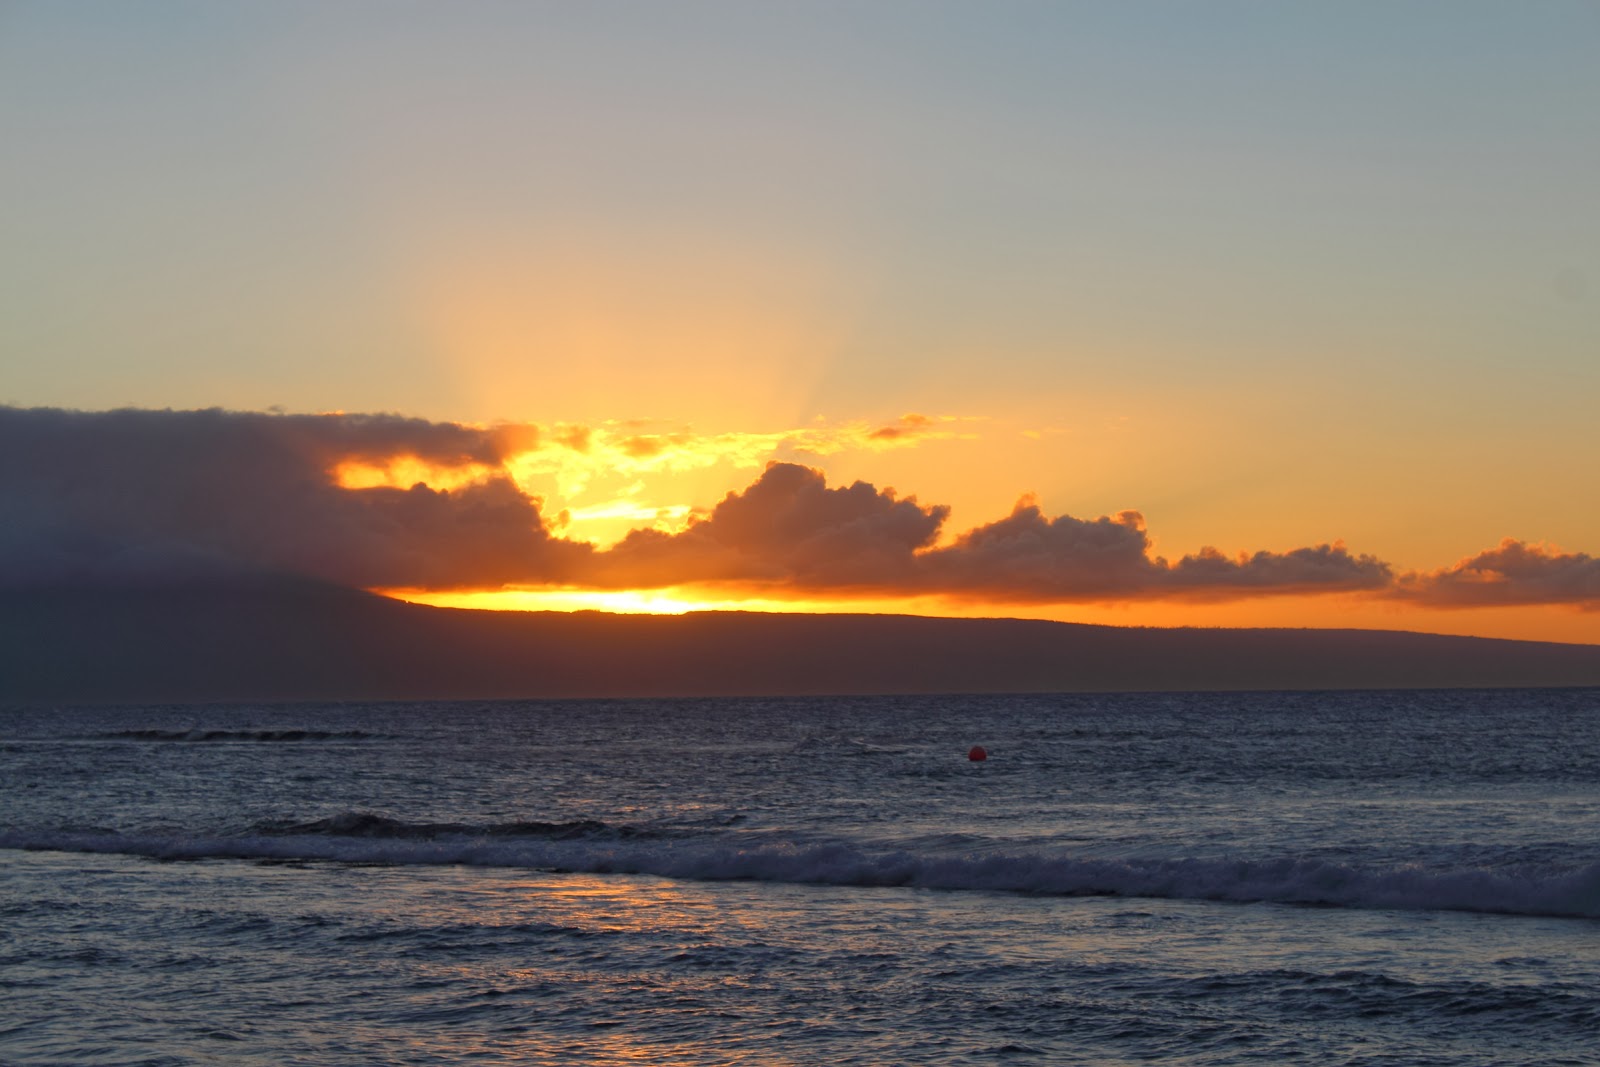 Maui sunset from Kaanapali (the island in the foreground is Lanai - Larry Ellison owns that island)